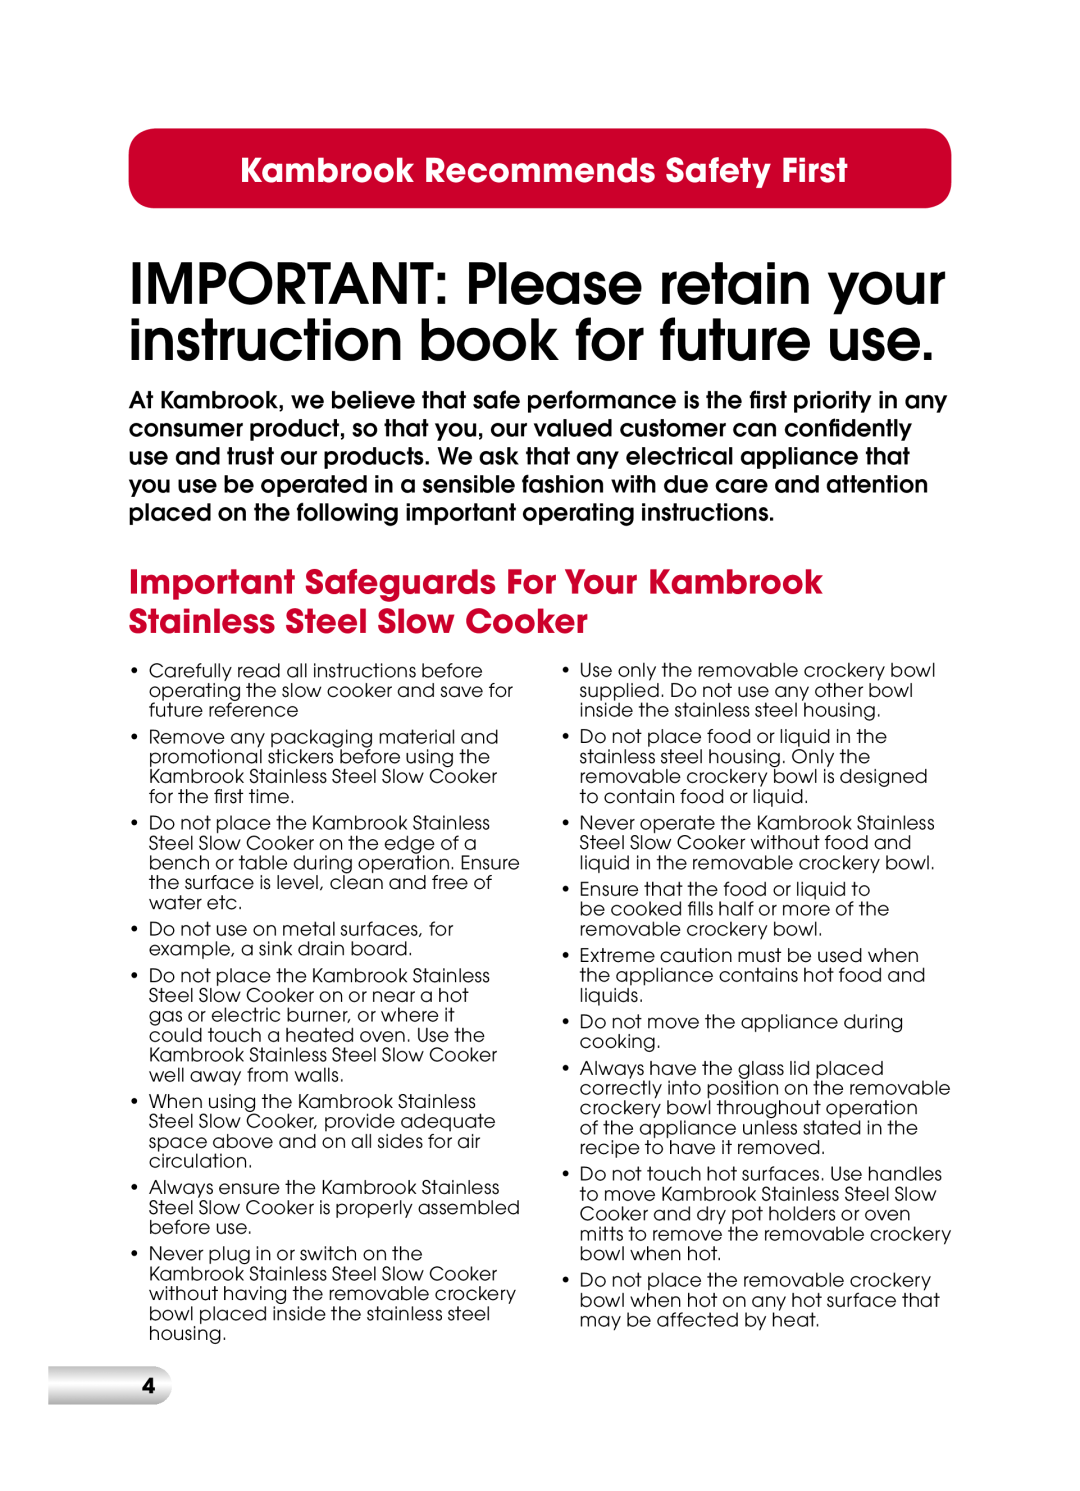 Kambrook KSC110 manual Kambrook Recommends Safety First 